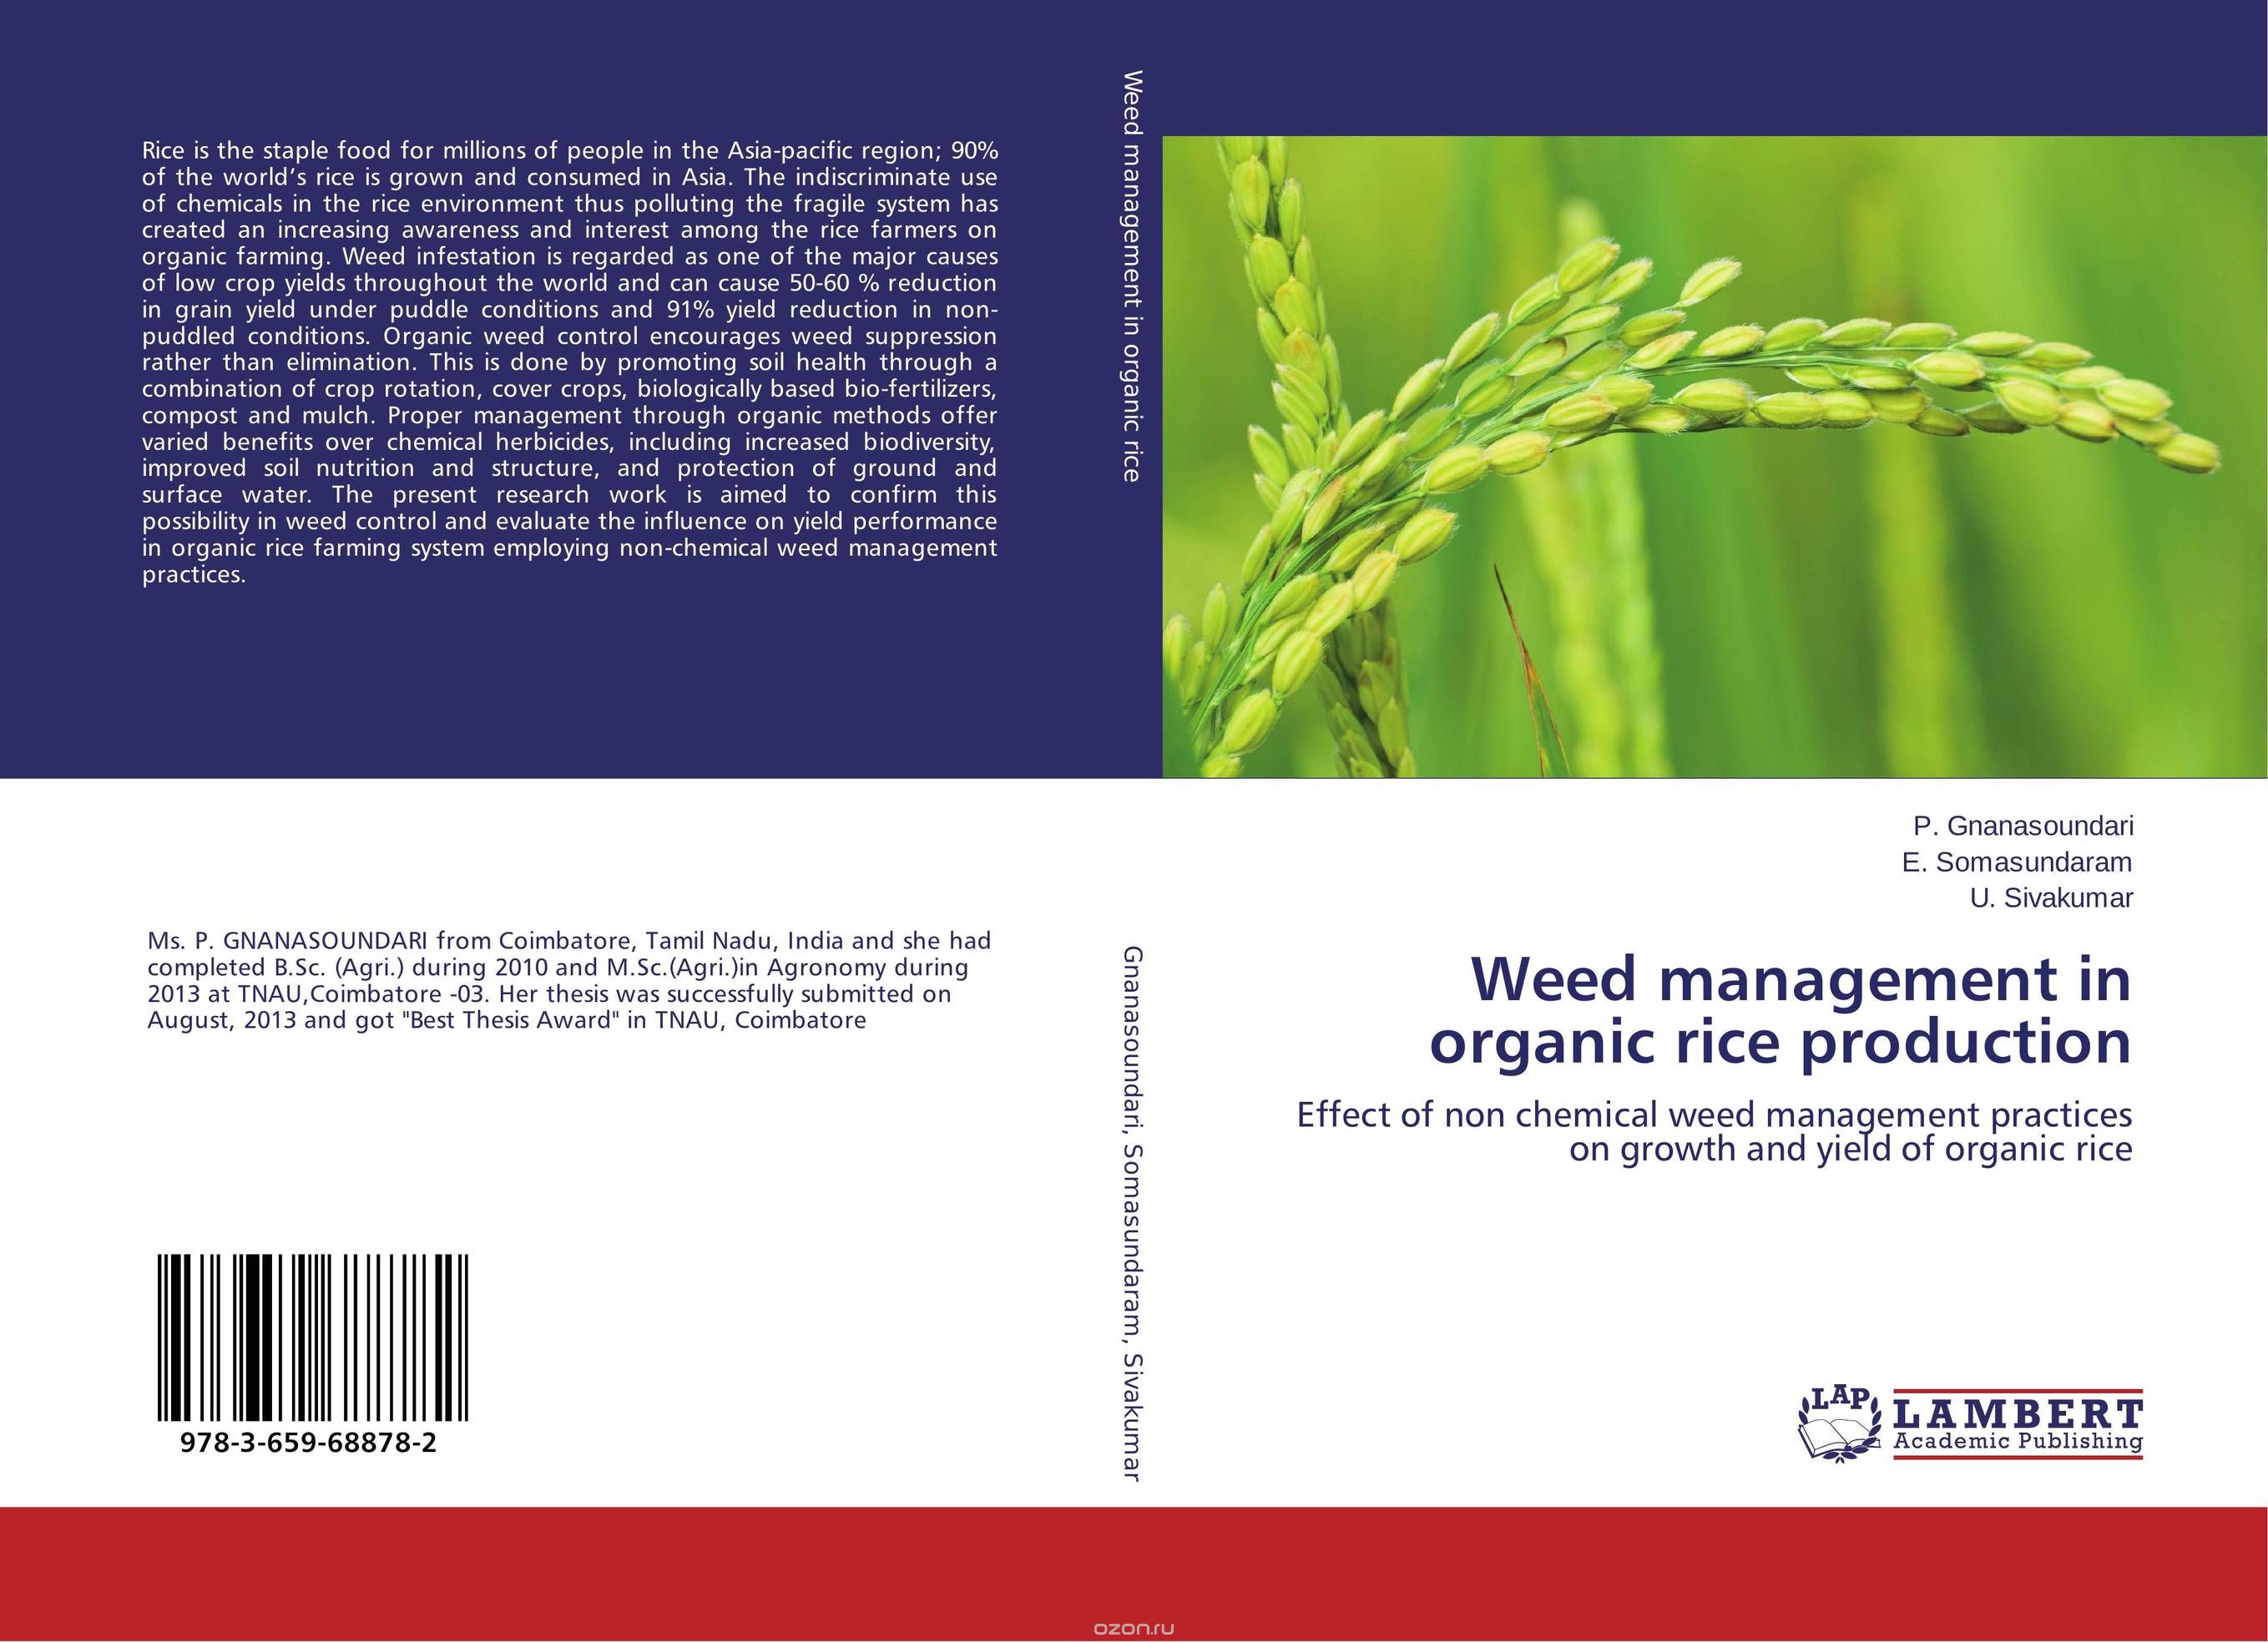 Weed management in organic rice production